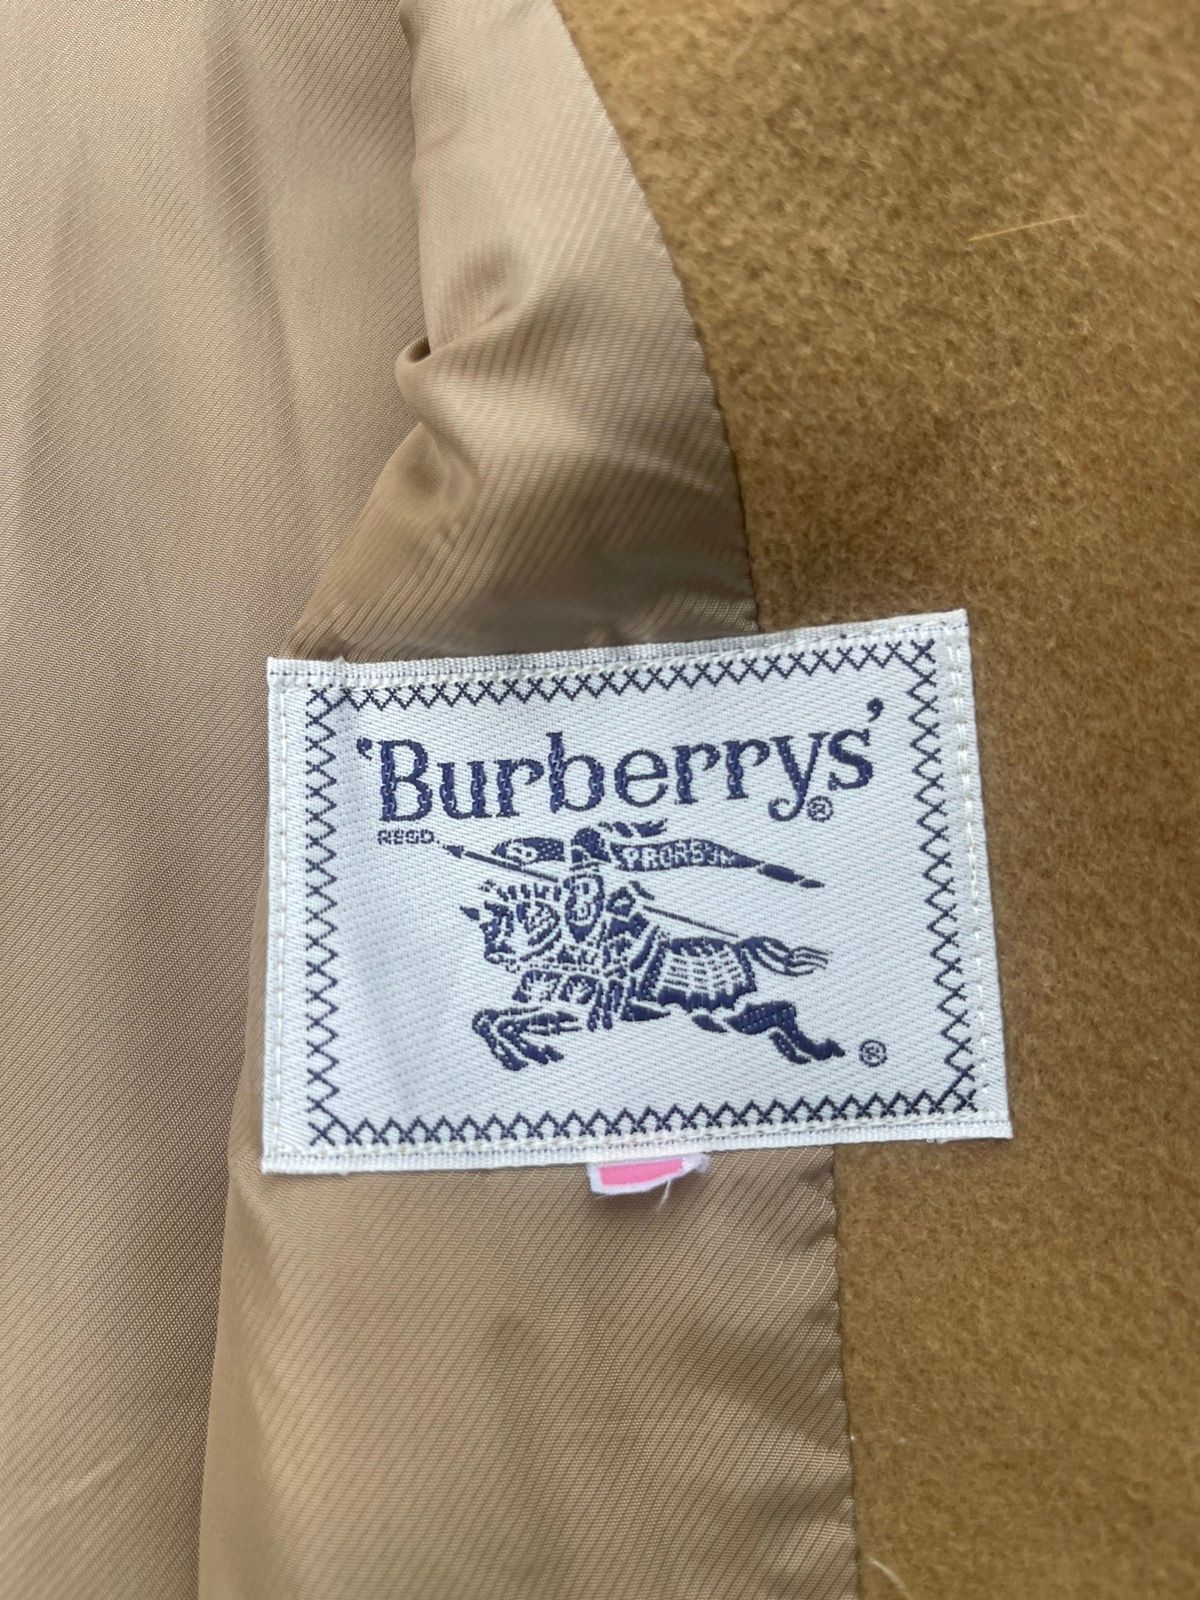 BURBERRY PRORSUM WOOL DOUBLE BREASTED JACKET - 3